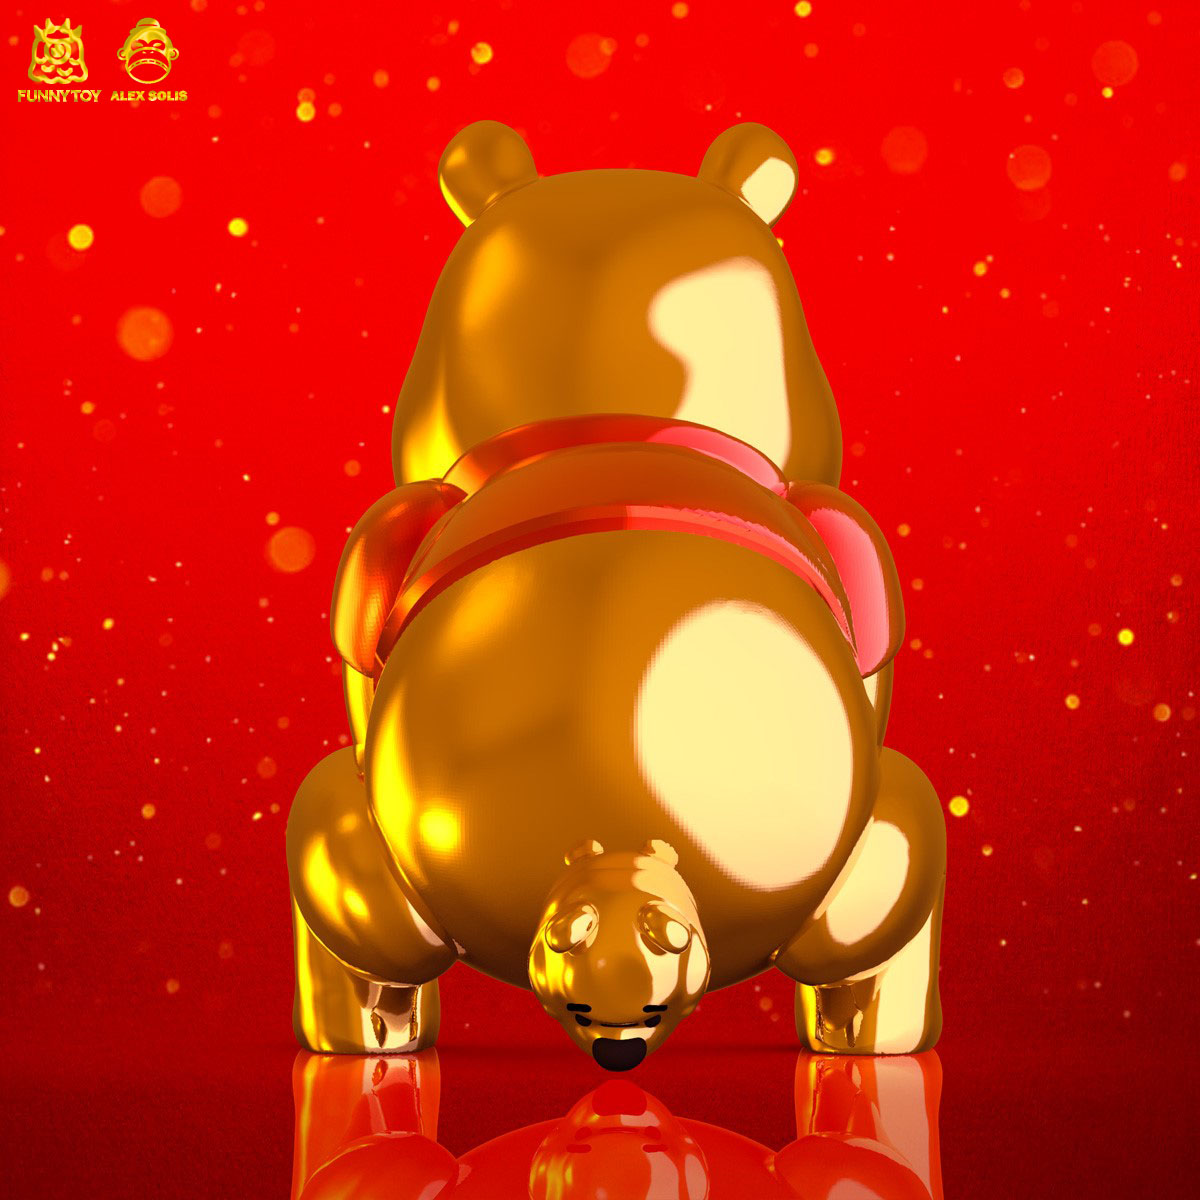 HAPPY NEW YEAR Edition of POOH POOH from Alex Solis x Funny Toy